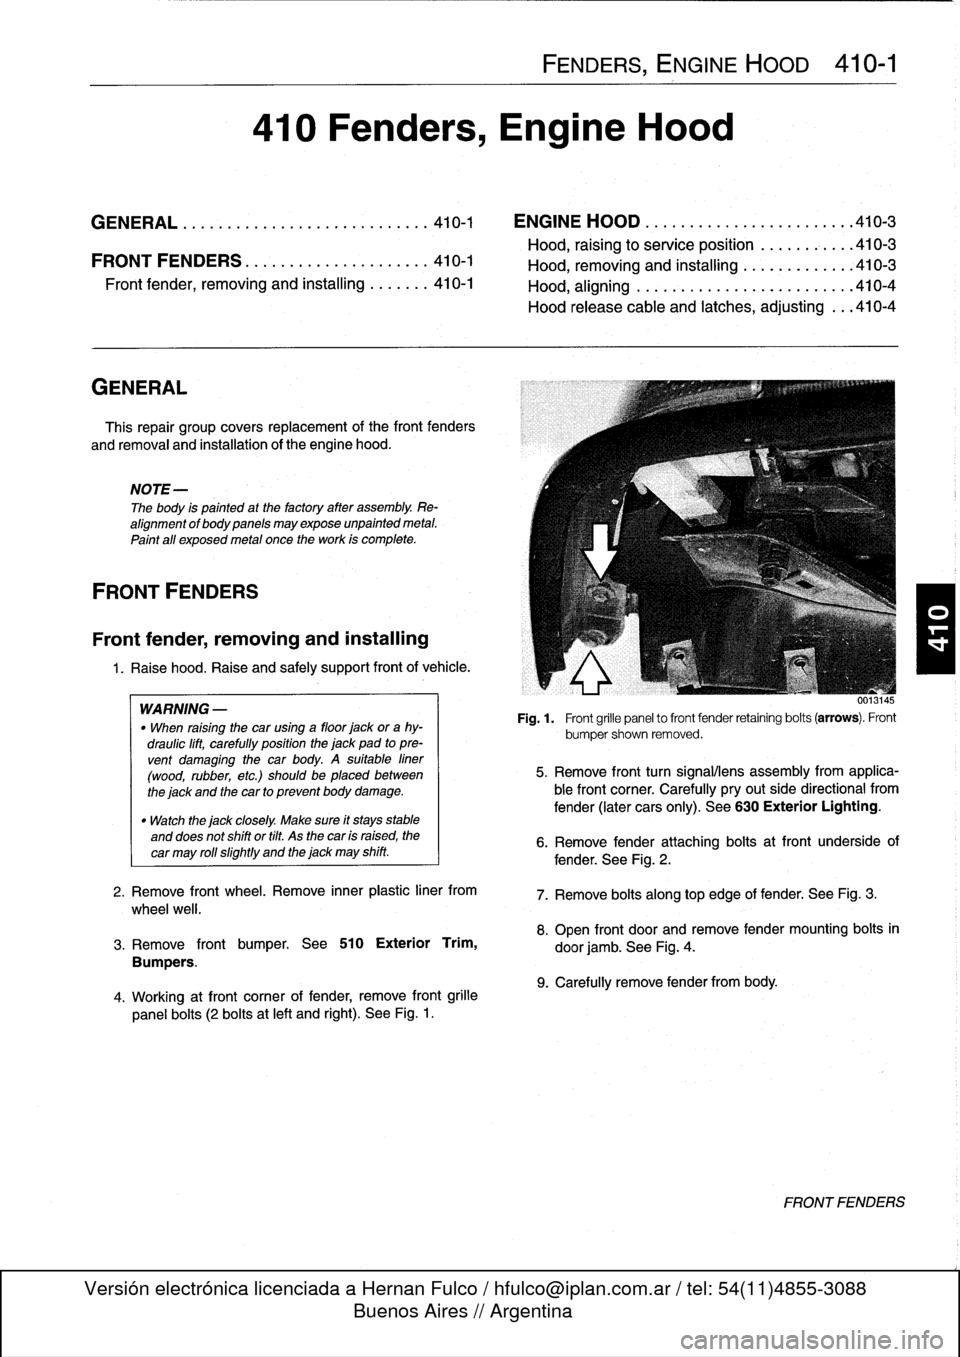 BMW 318i 1998 E36 Workshop Manual 
GENERAL

This
repair
group
covers
replacement
of
the
front
fenders

and
removal
and
installation
of
the
engine
hood
.

NOTE-

The
body
is
painted
at
the
factoryafter
assembly
.
Re-
alignment
of
body
